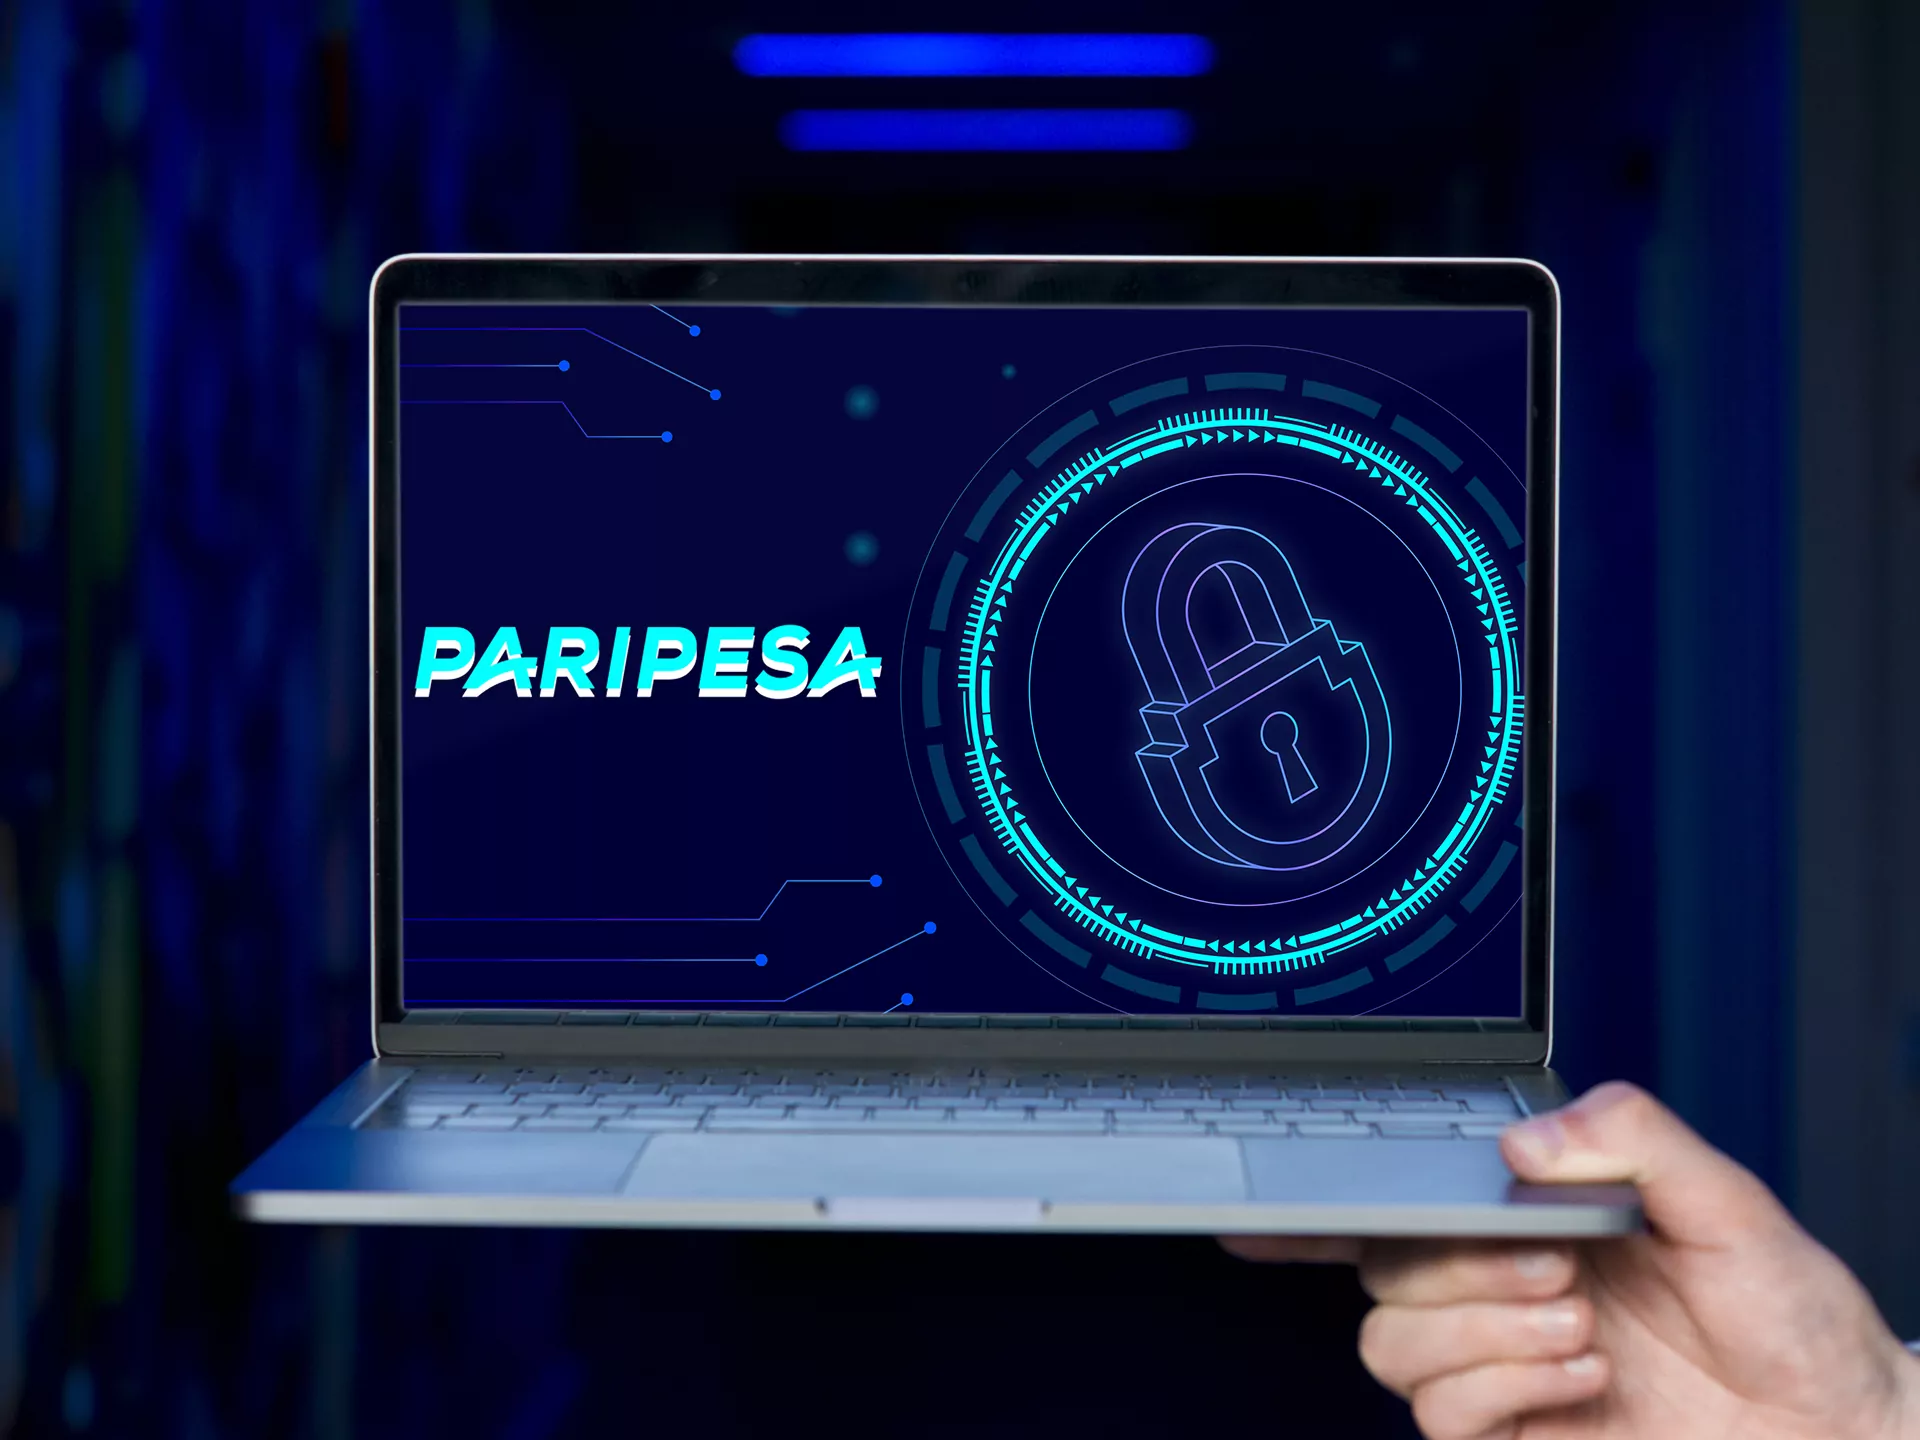 Paripesa secures all of your information.